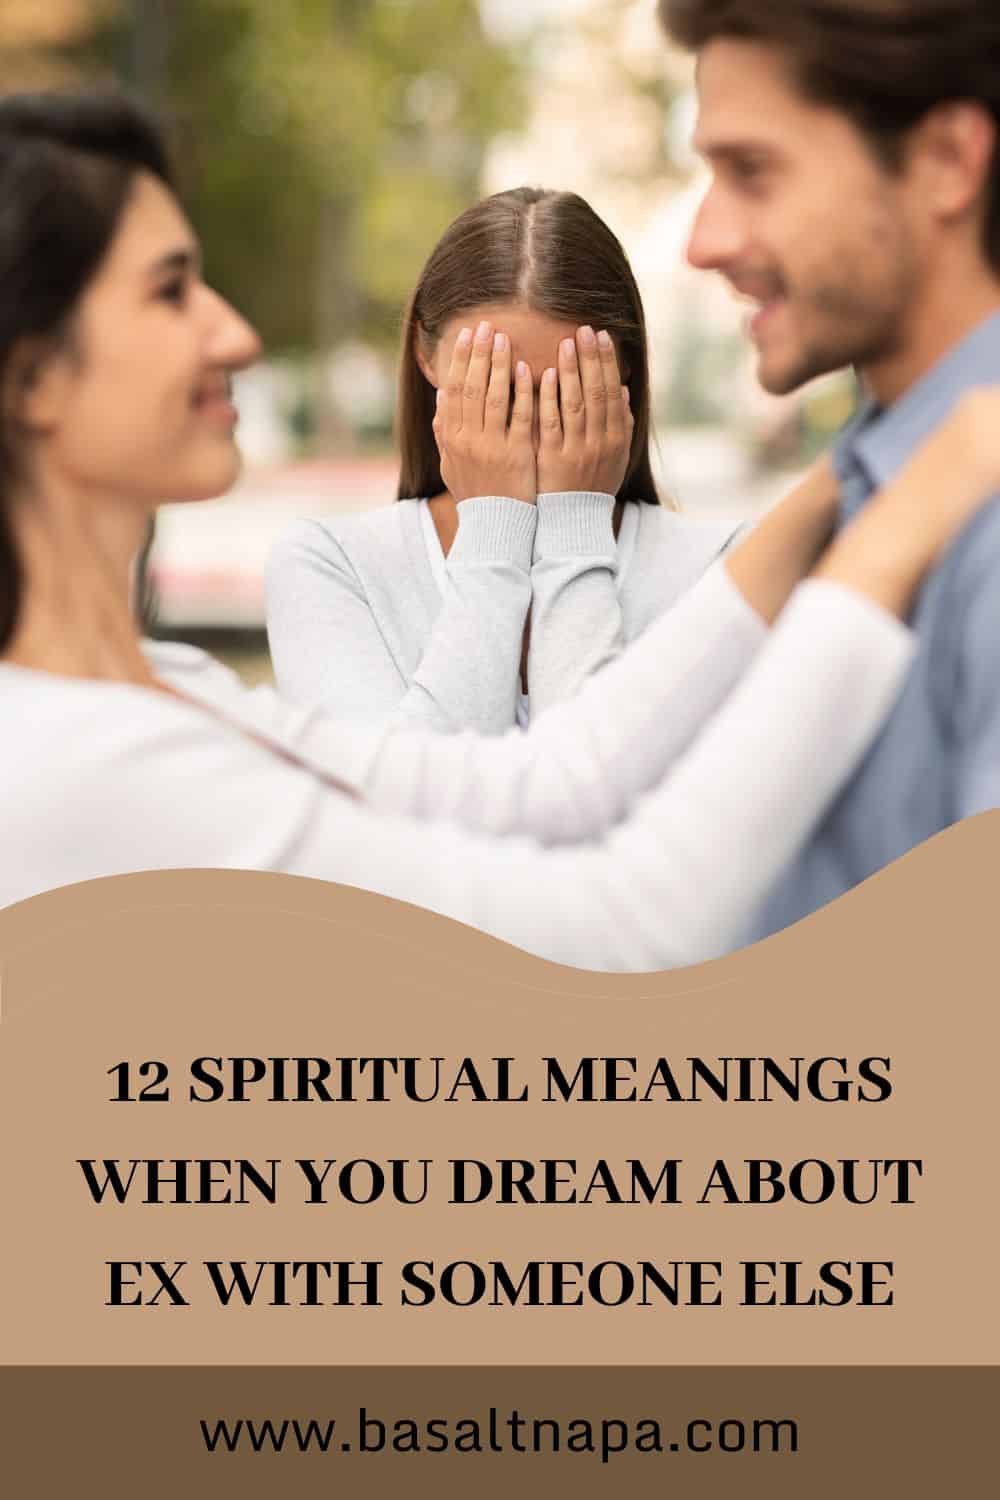 12 Spiritual Meanings When You Dream About EX With Someone Else